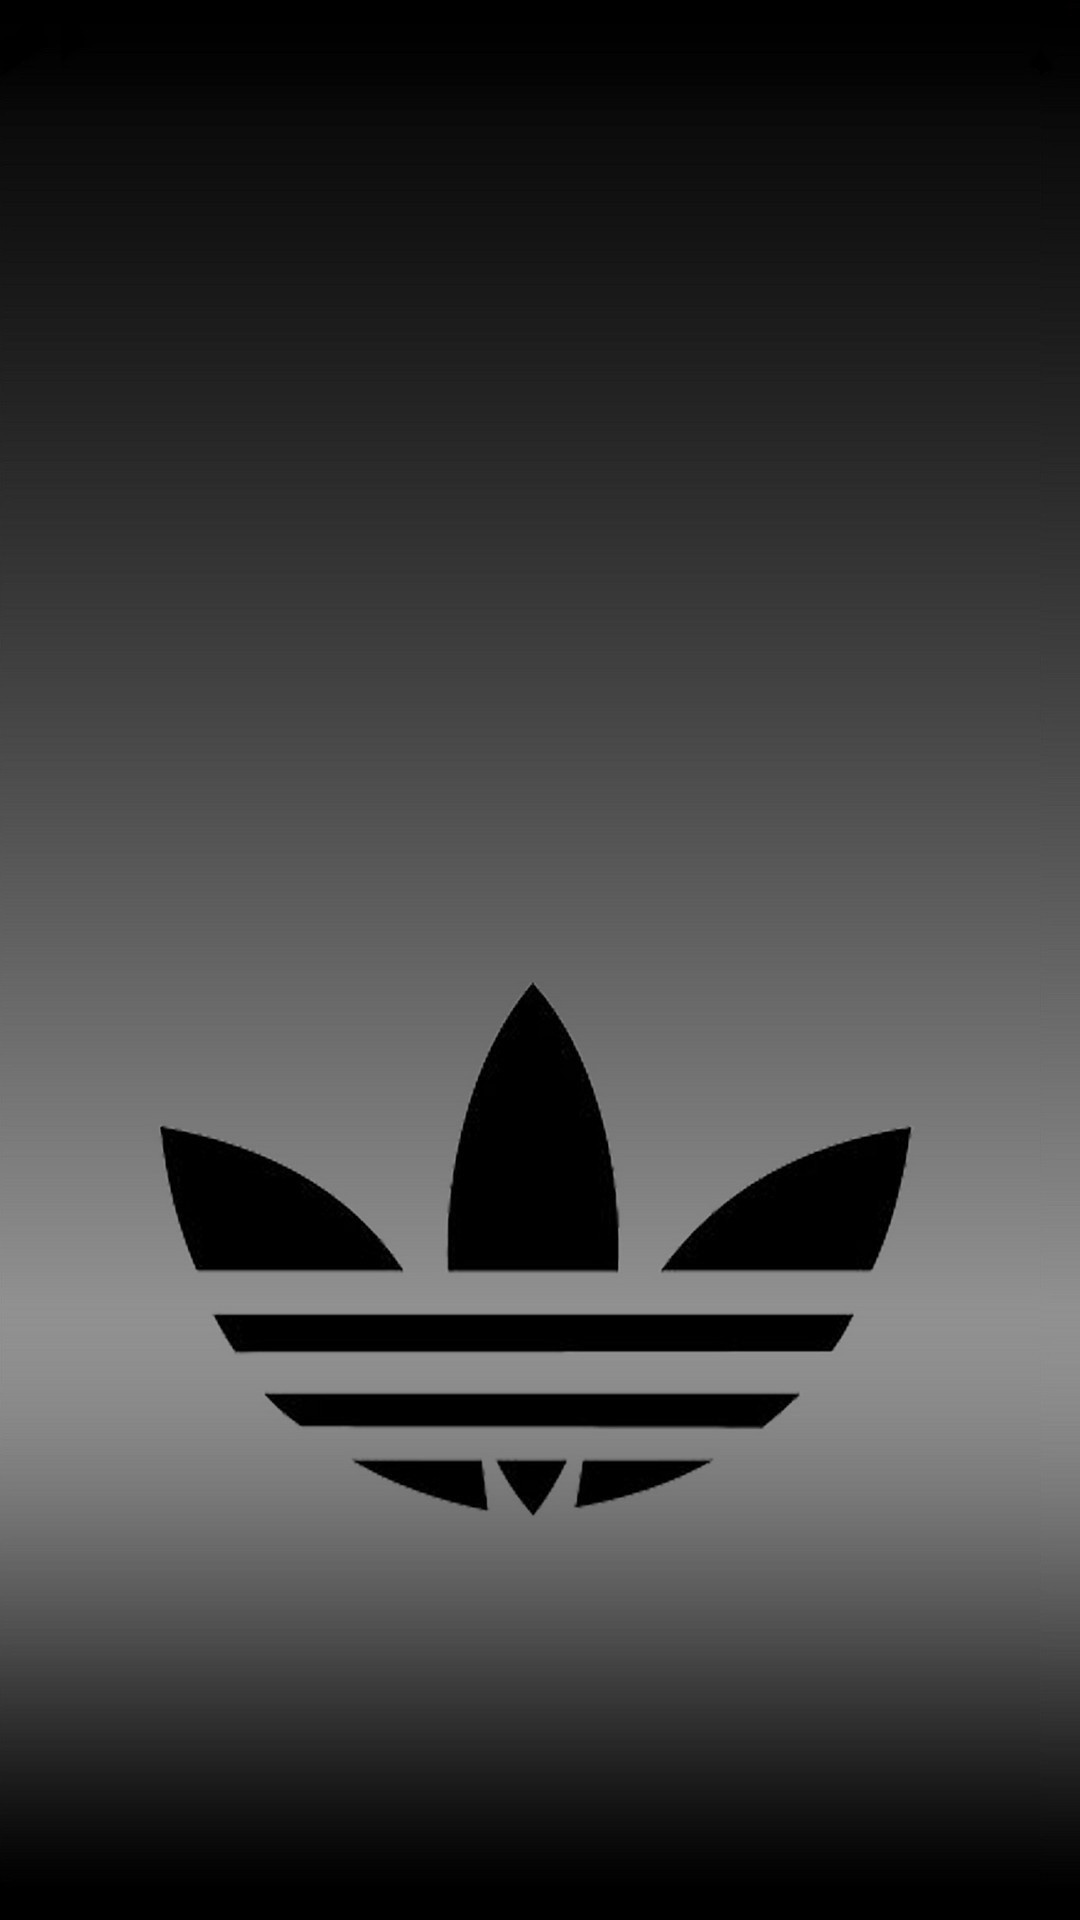 Adidas logo, Wallpaper collection, Unique designs, Brand promotion, 1080x1920 Full HD Handy